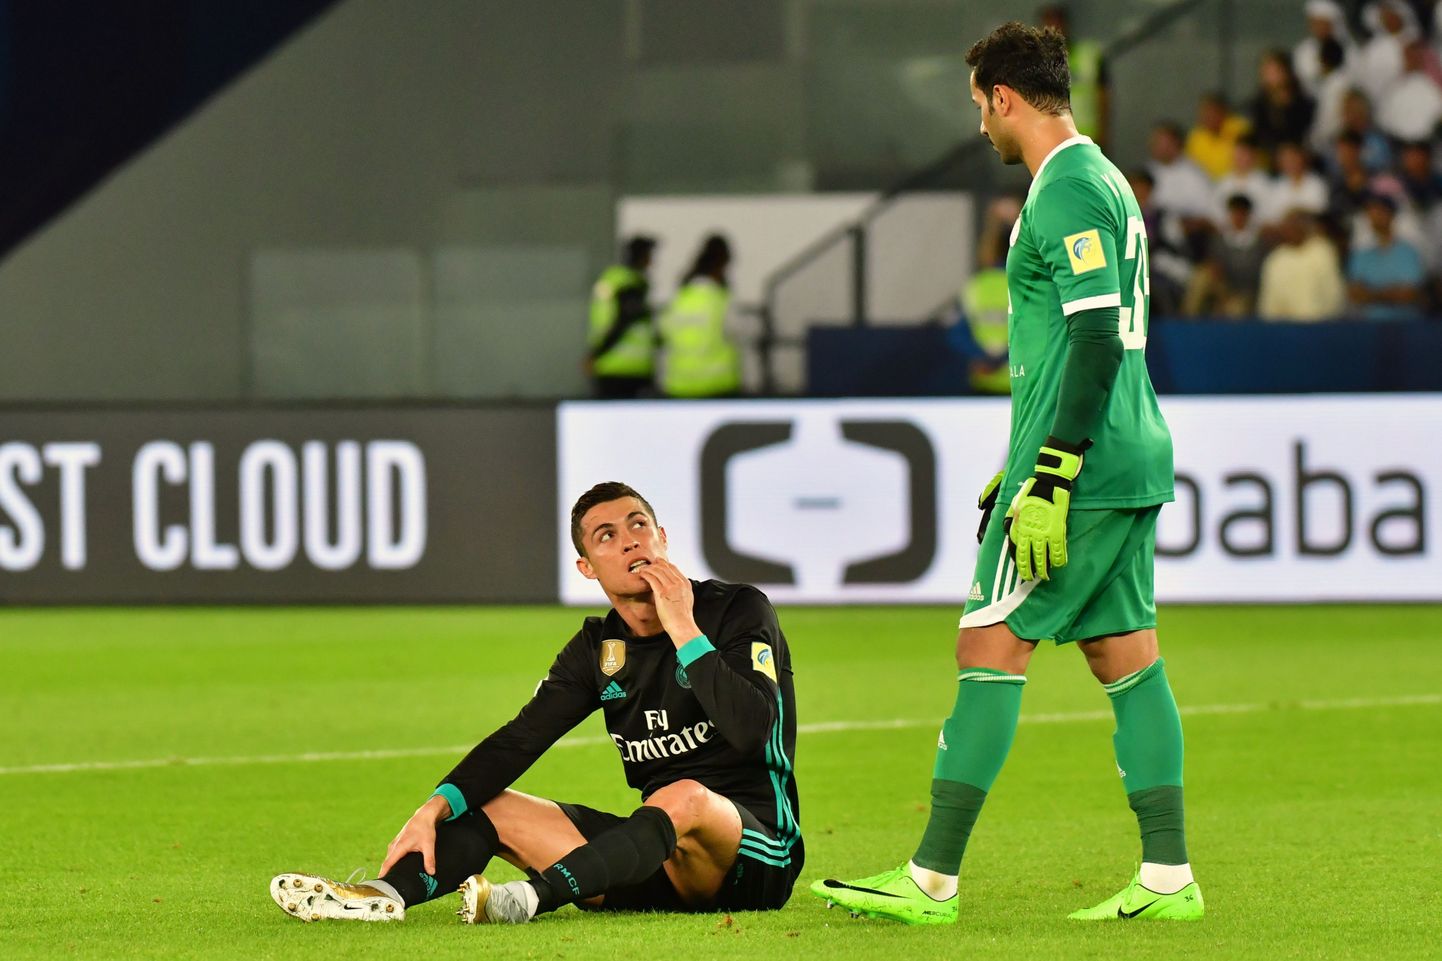 Real Madrid's Portuguese forward Cristiano Ronaldo (L) reacts after a collision with a shot as he is marked by al-Jazira's Emirati goalkeeper Khaled al-Senani  (R) during the FIFA Club World Cup semi-final match in the Emirati capital Abu Dhabi on December 13, 2017. / AFP PHOTO / GIUSEPPE CACACE